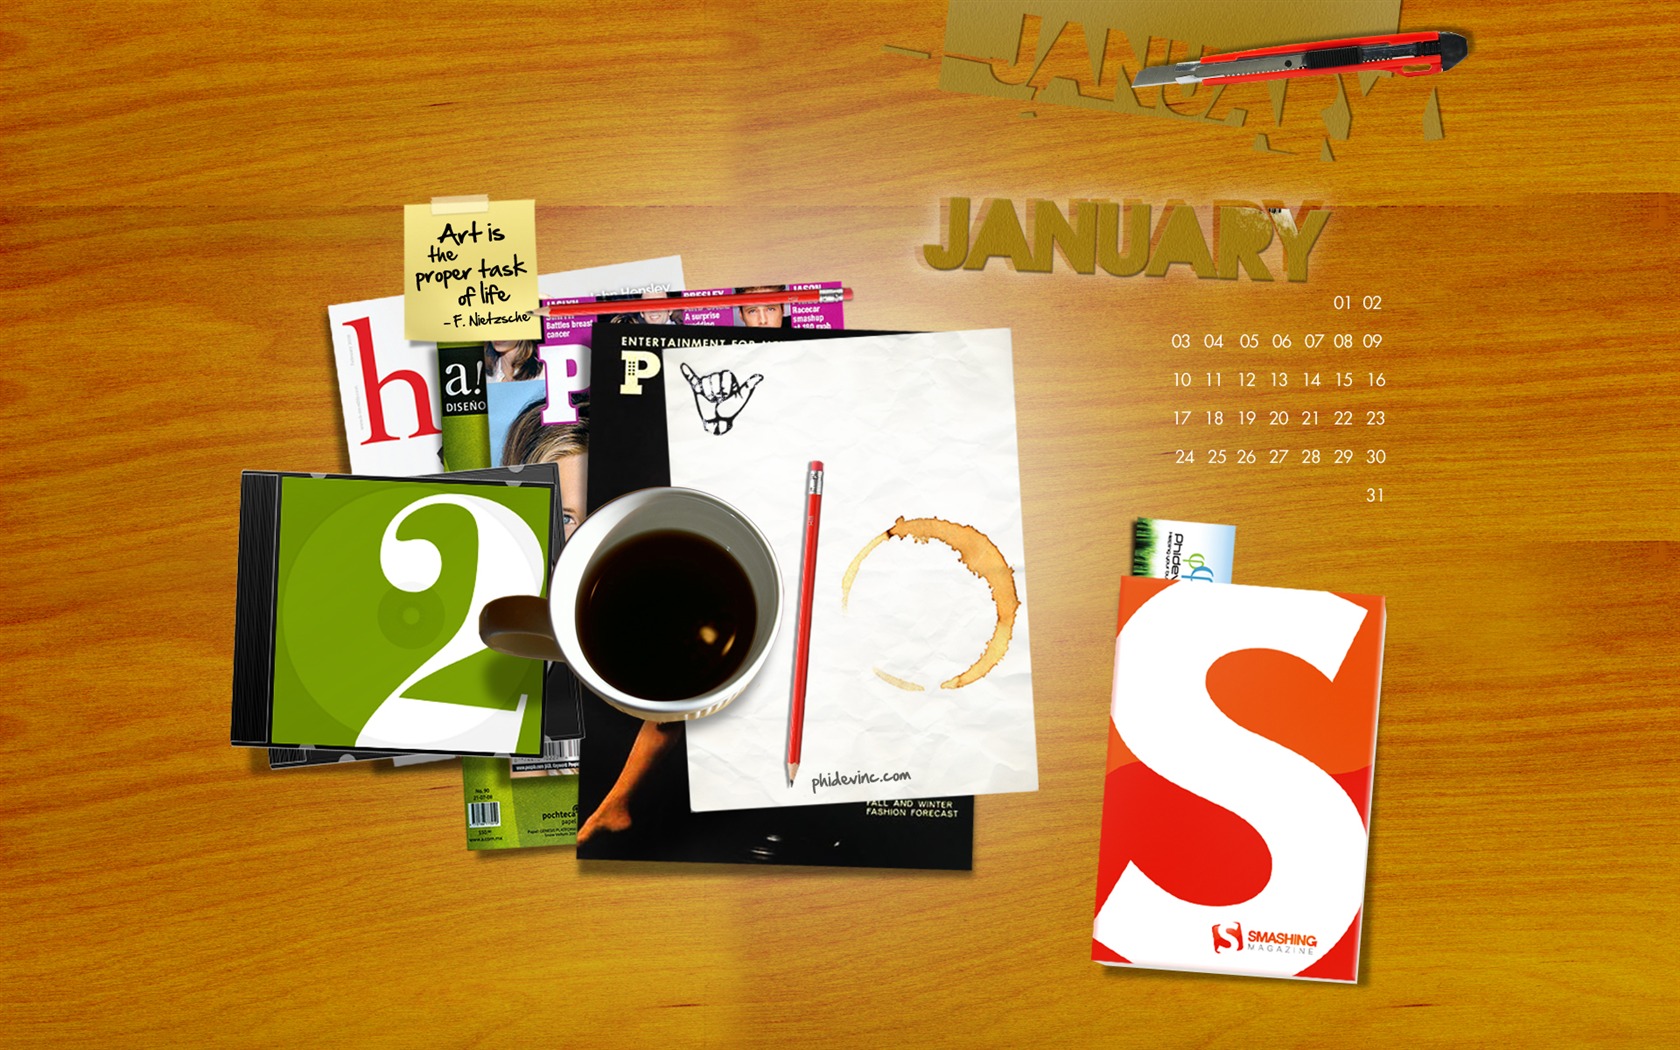 Microsoft Official Win7 New Year Wallpapers #12 - 1680x1050